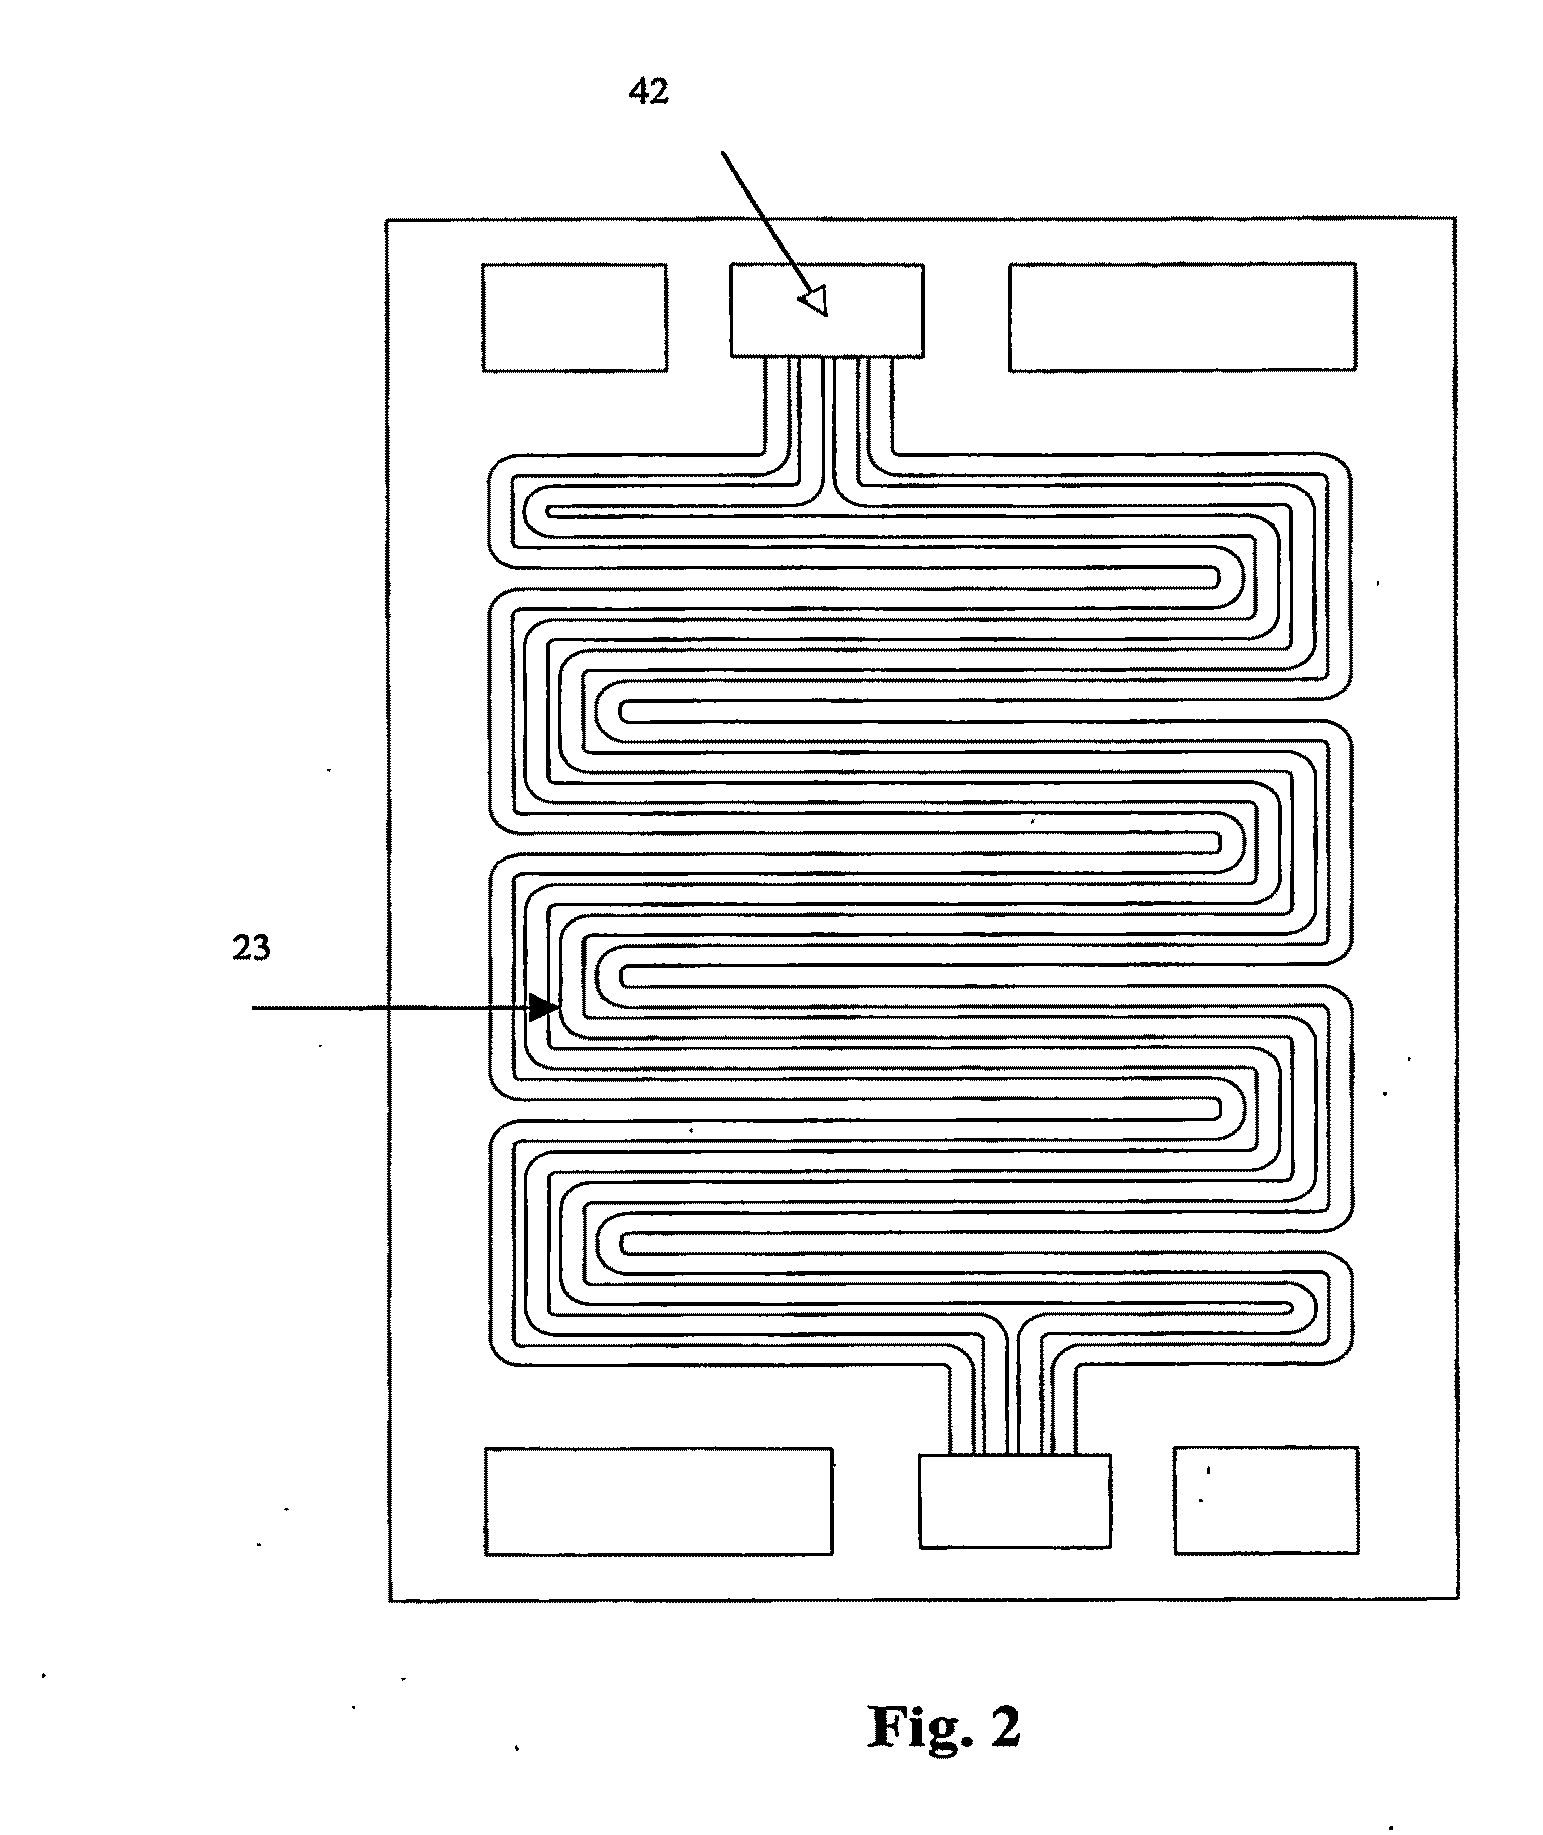 Process for sealing plates in a fuel cell